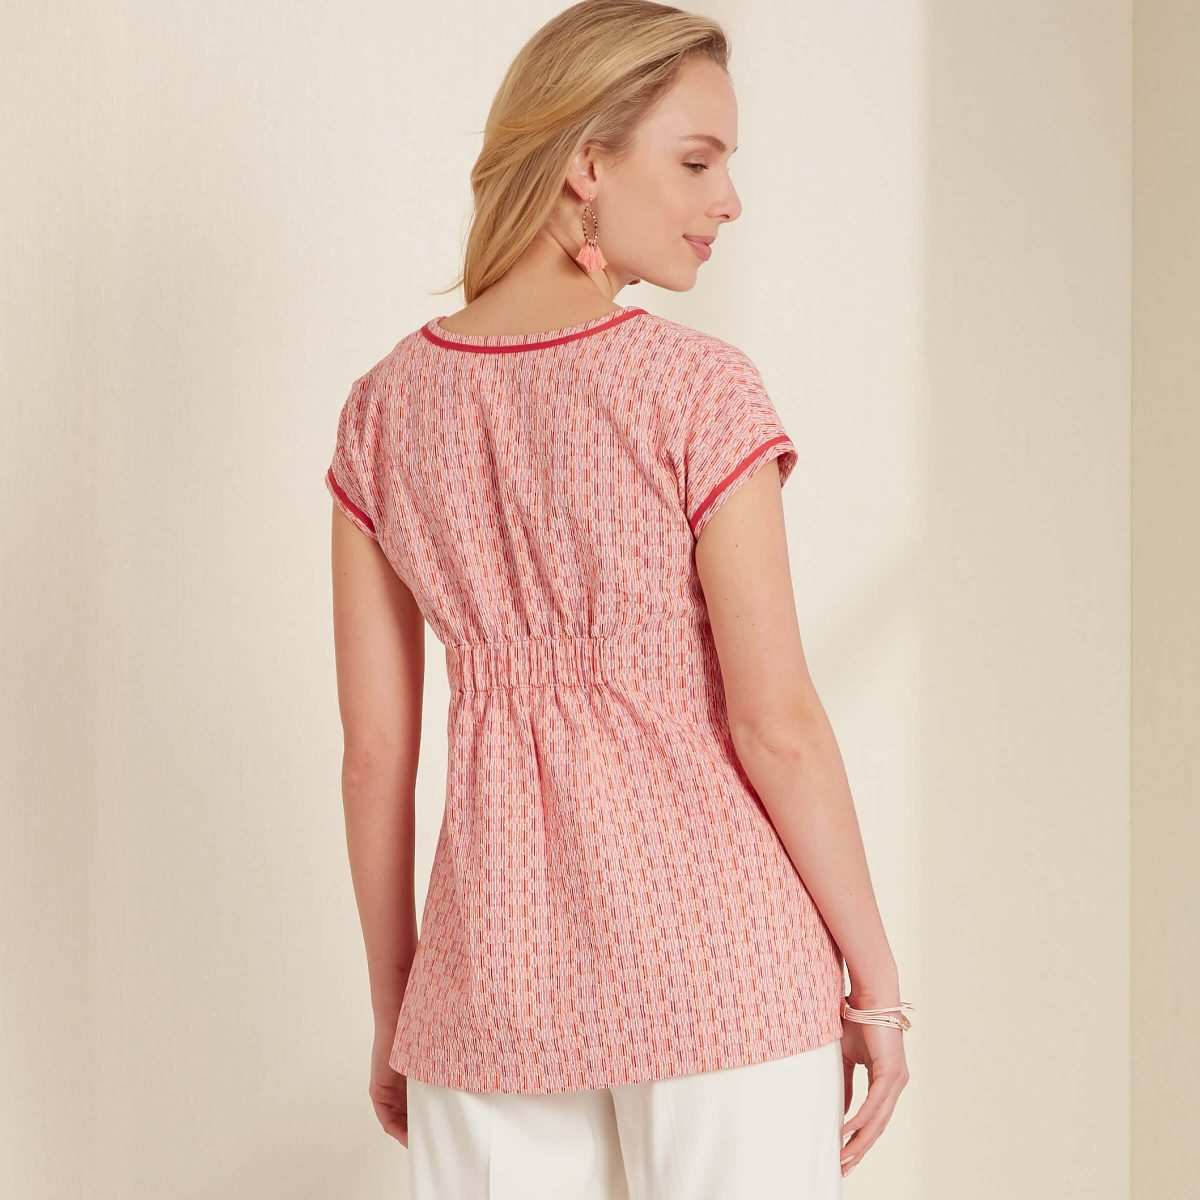 New Look Sewing Pattern N6672 Misses' Top or Tunic